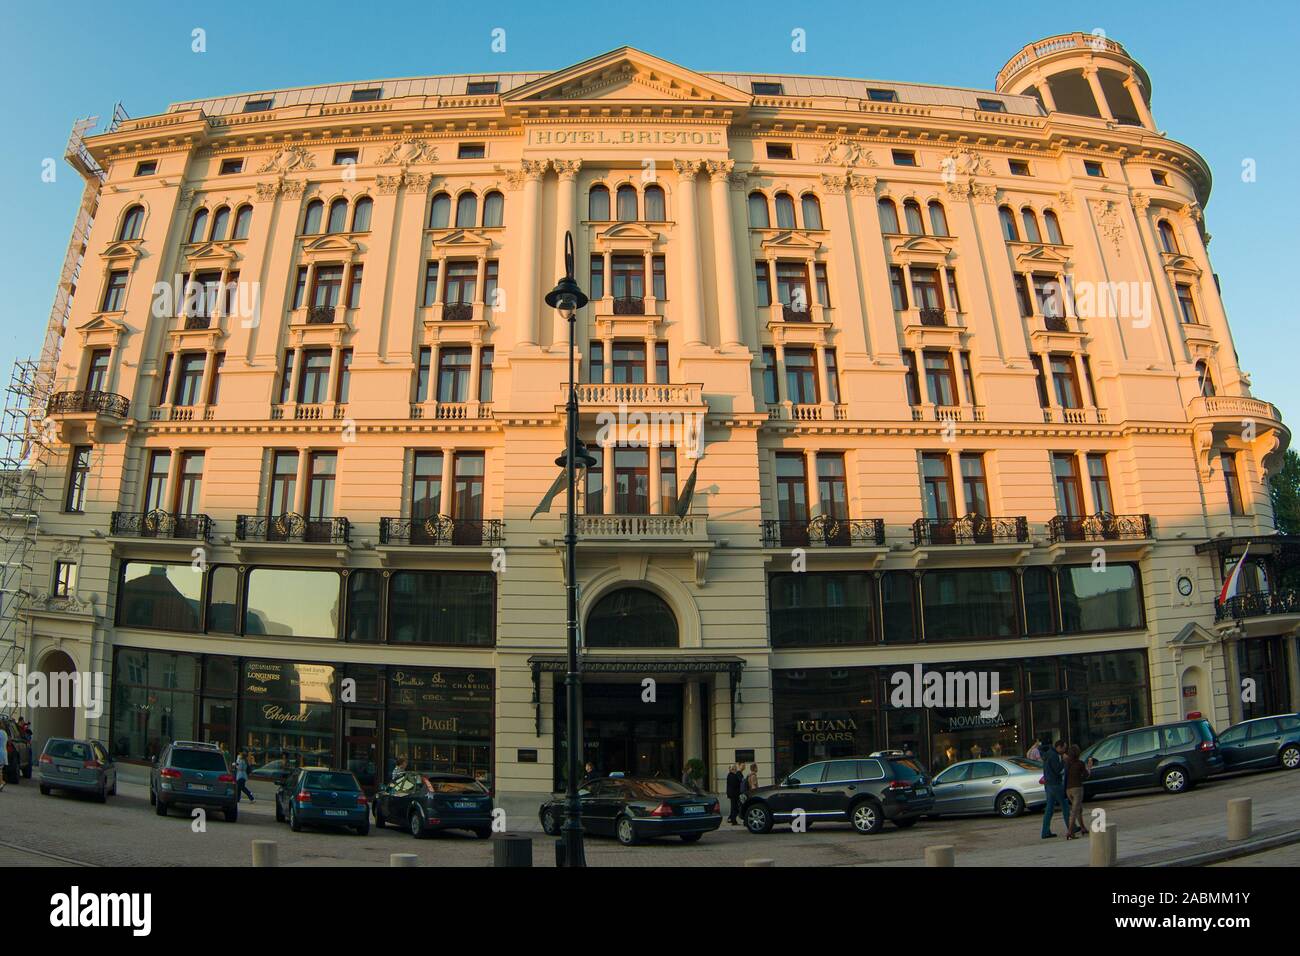 Five star Bristol Hotel building in the light of the setting sun, Warsaw, Poland Stock Photo